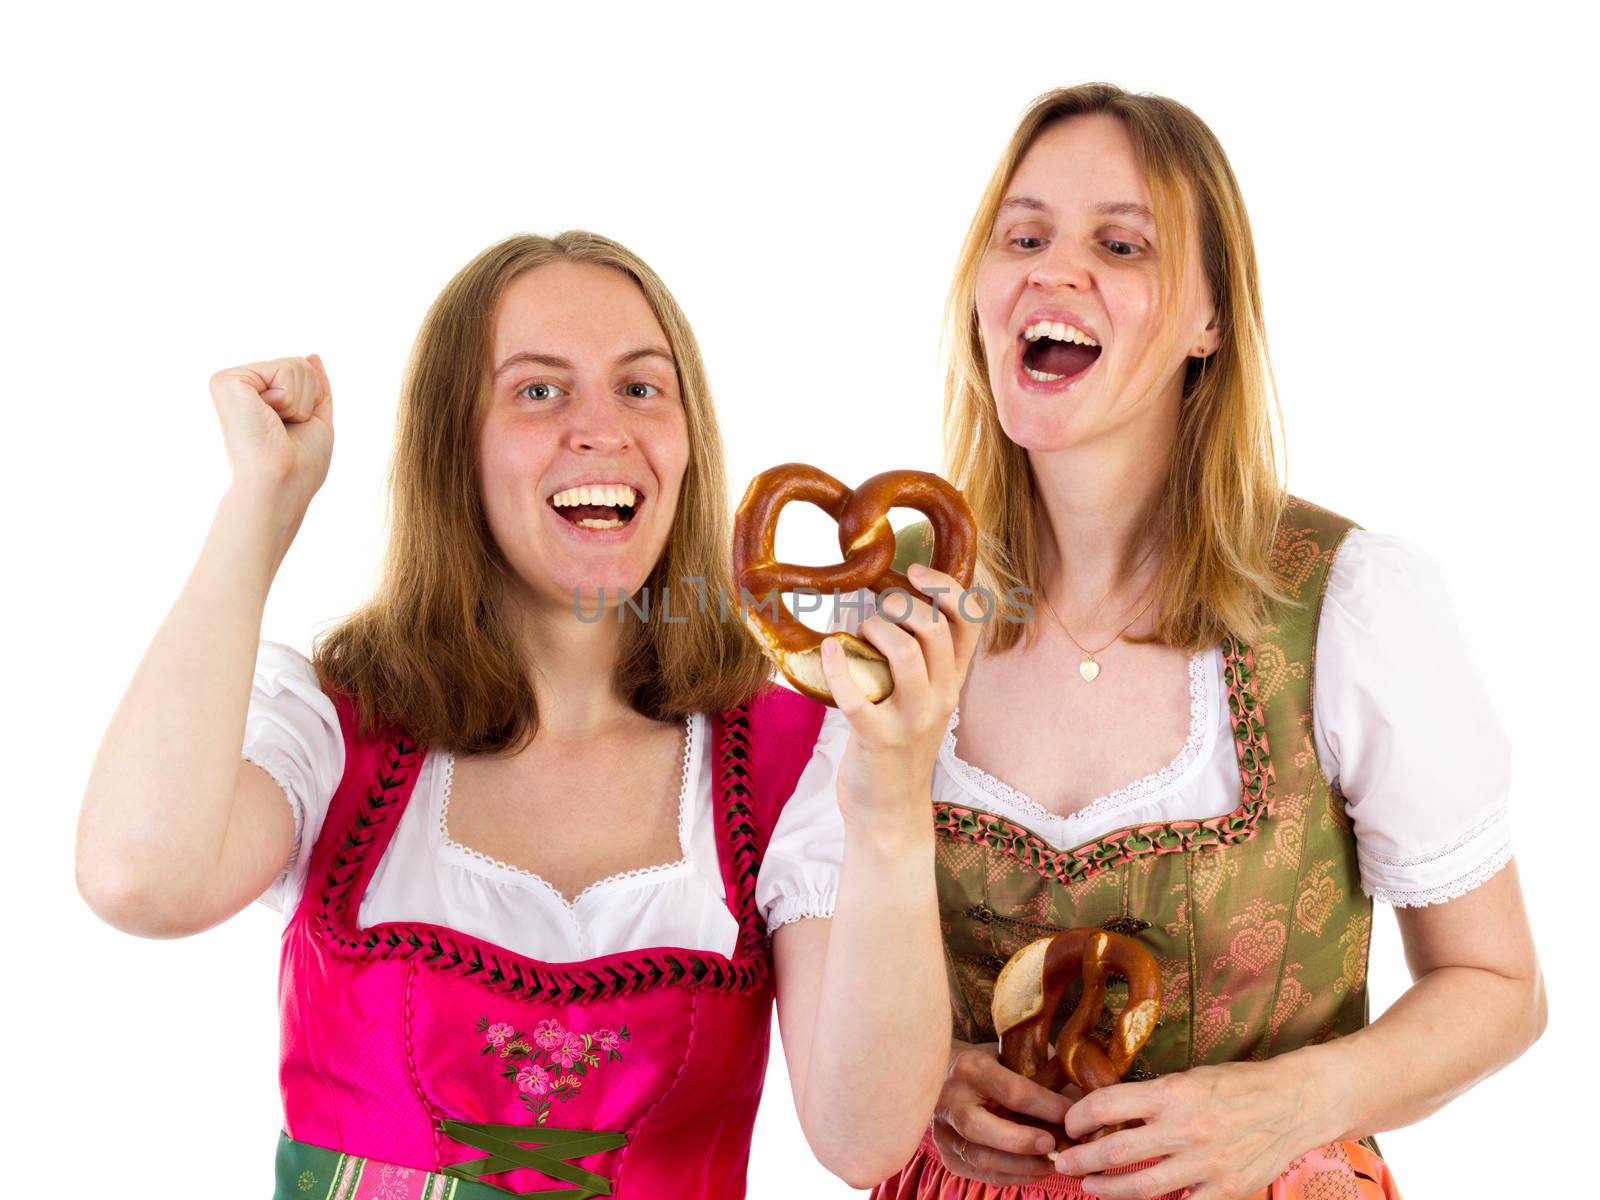 Women in dirndl eating delicious pretzel by gwolters